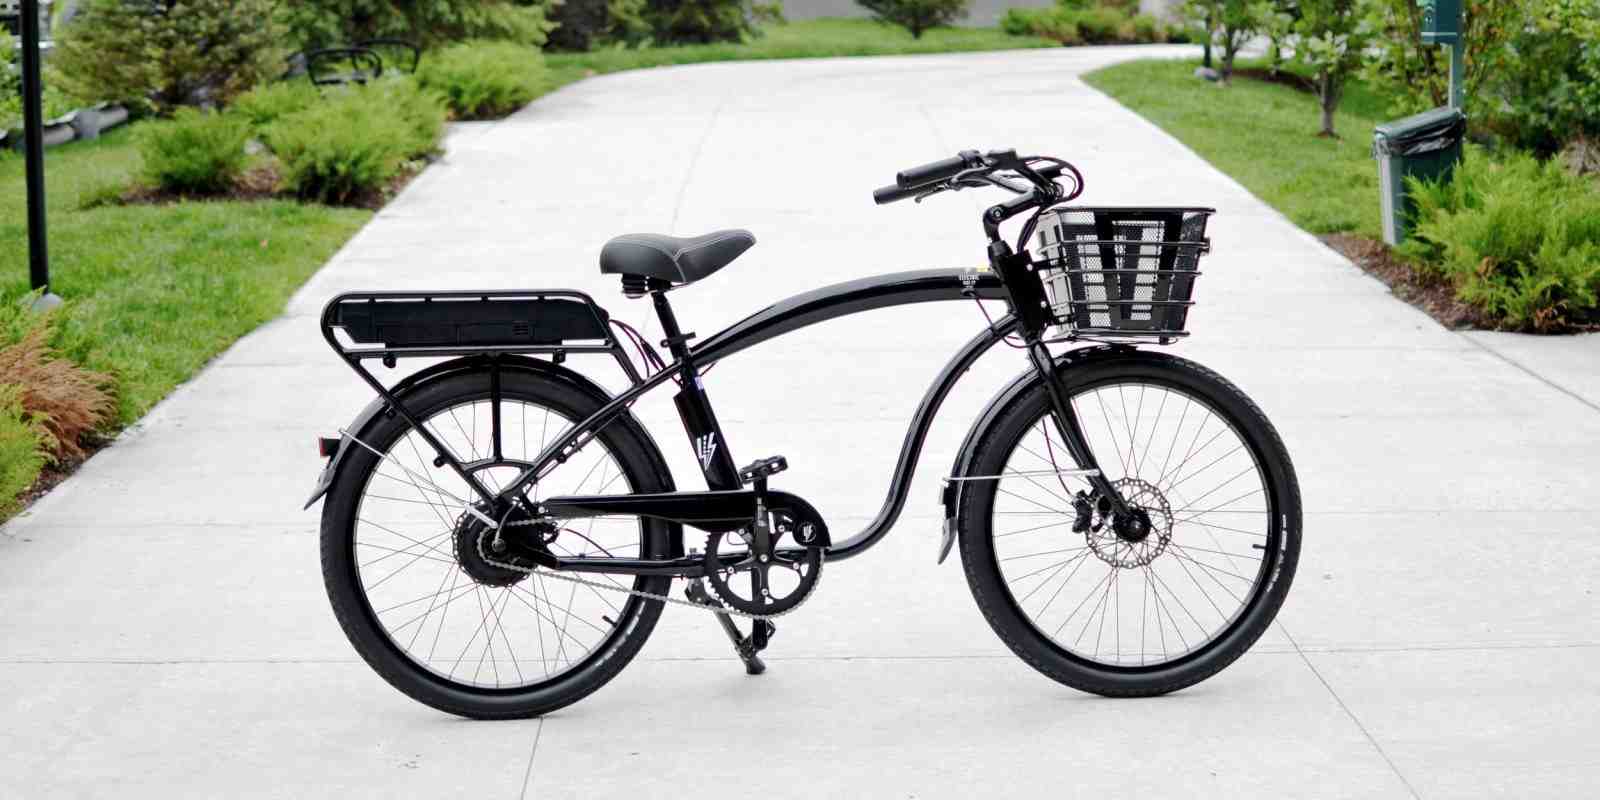 Are any electric bikes made in USA?